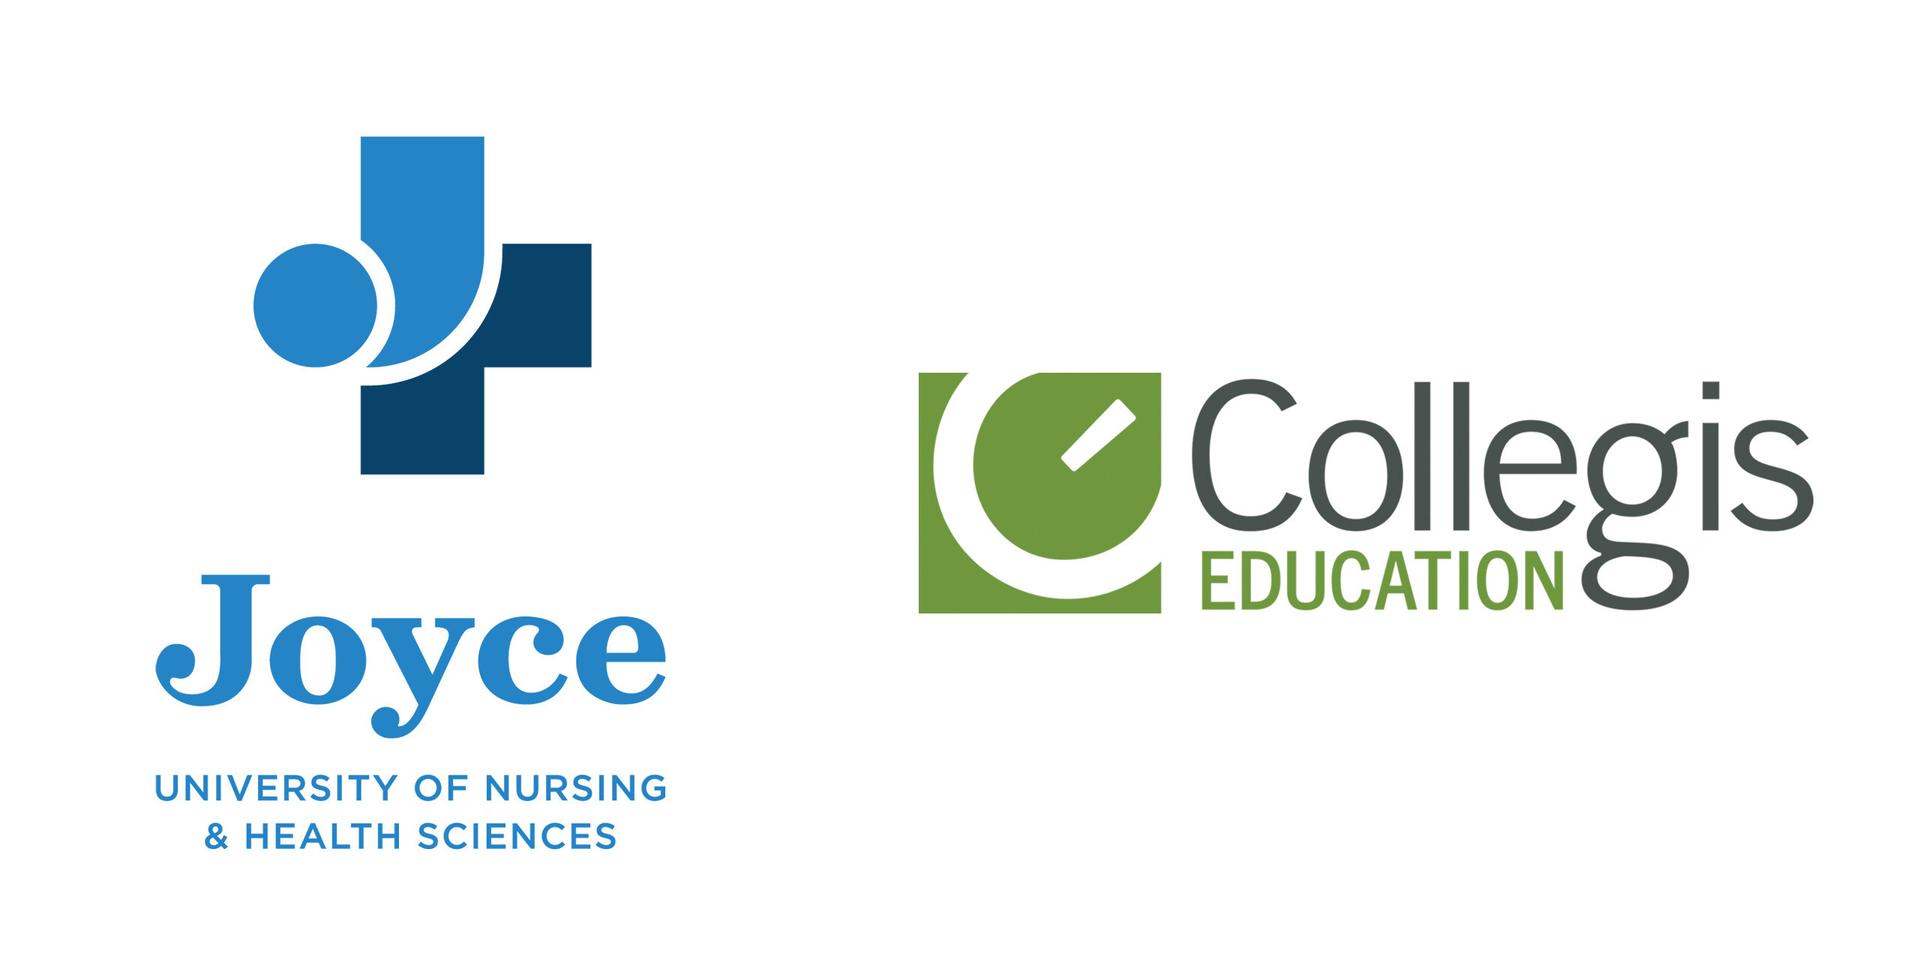 Joyce University of Nursing & Health Sciences Expands Partnership With Collegis Education for Technology Managed Services